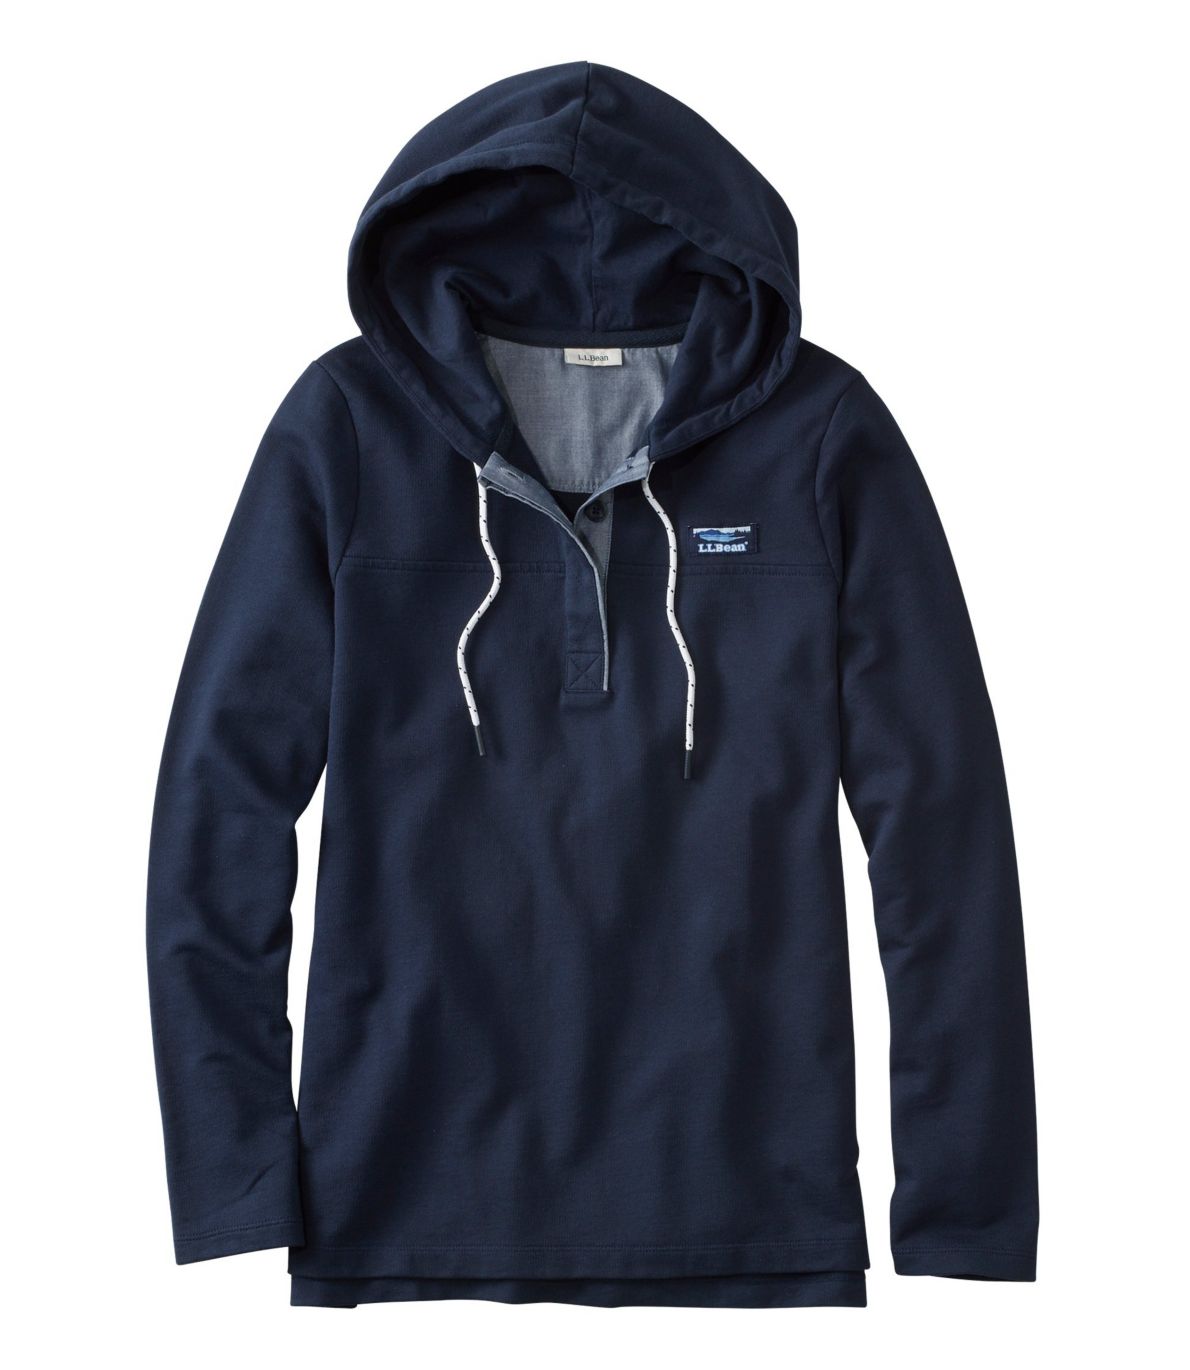 Women's Soft Cotton Rugby, Hoodie Pullover